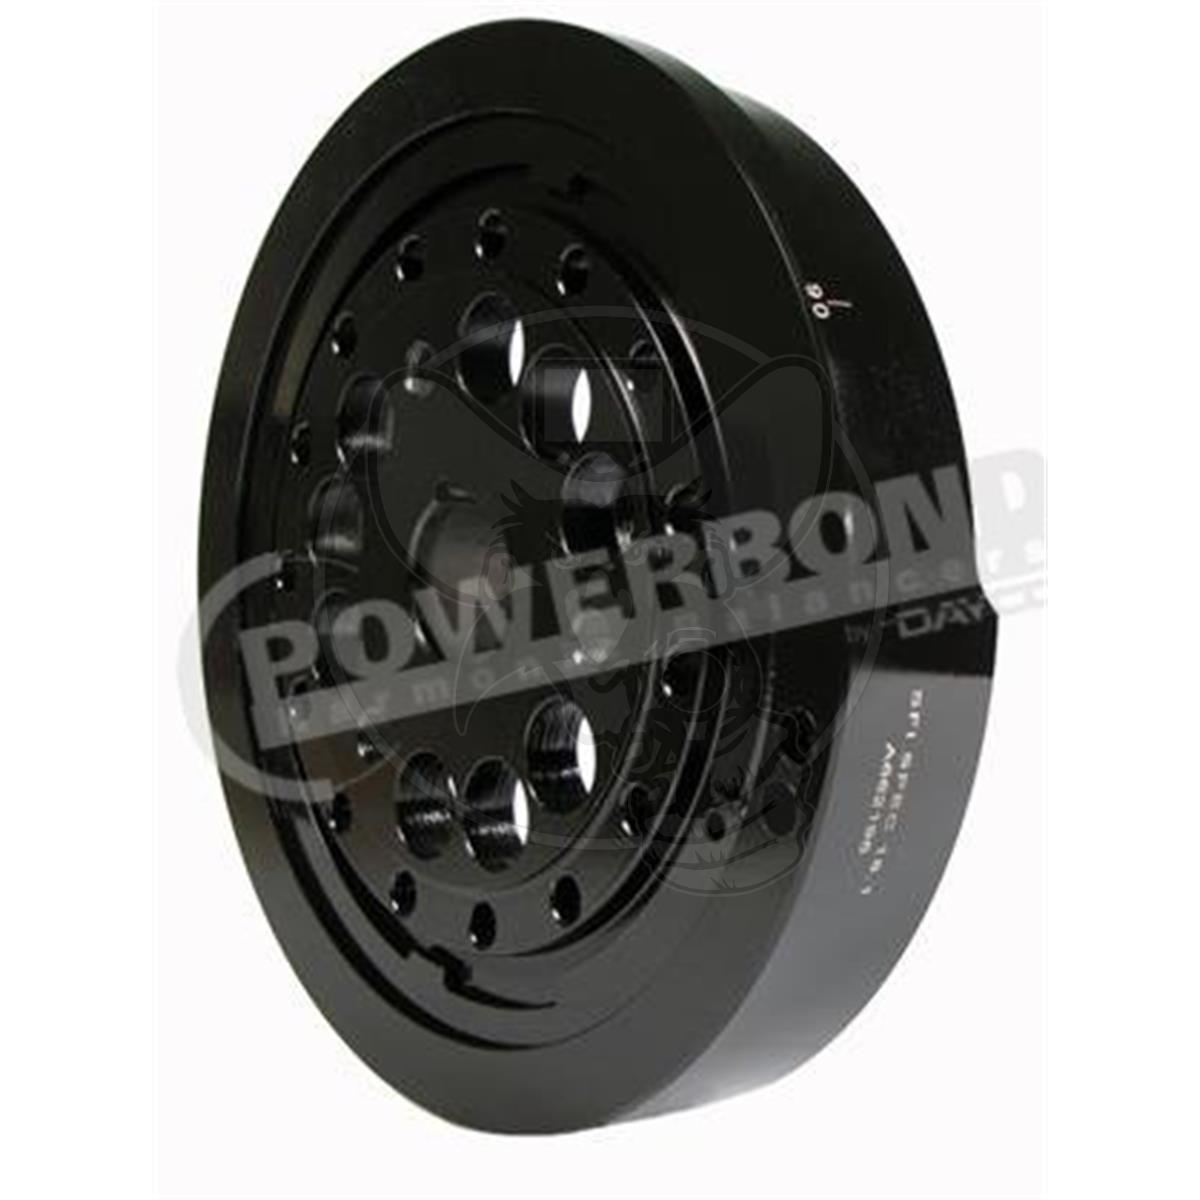 Powerbond Balancers PB2221-SS 7 SFI Approved Steel Harmonic Balancer for Small Block Chevy 